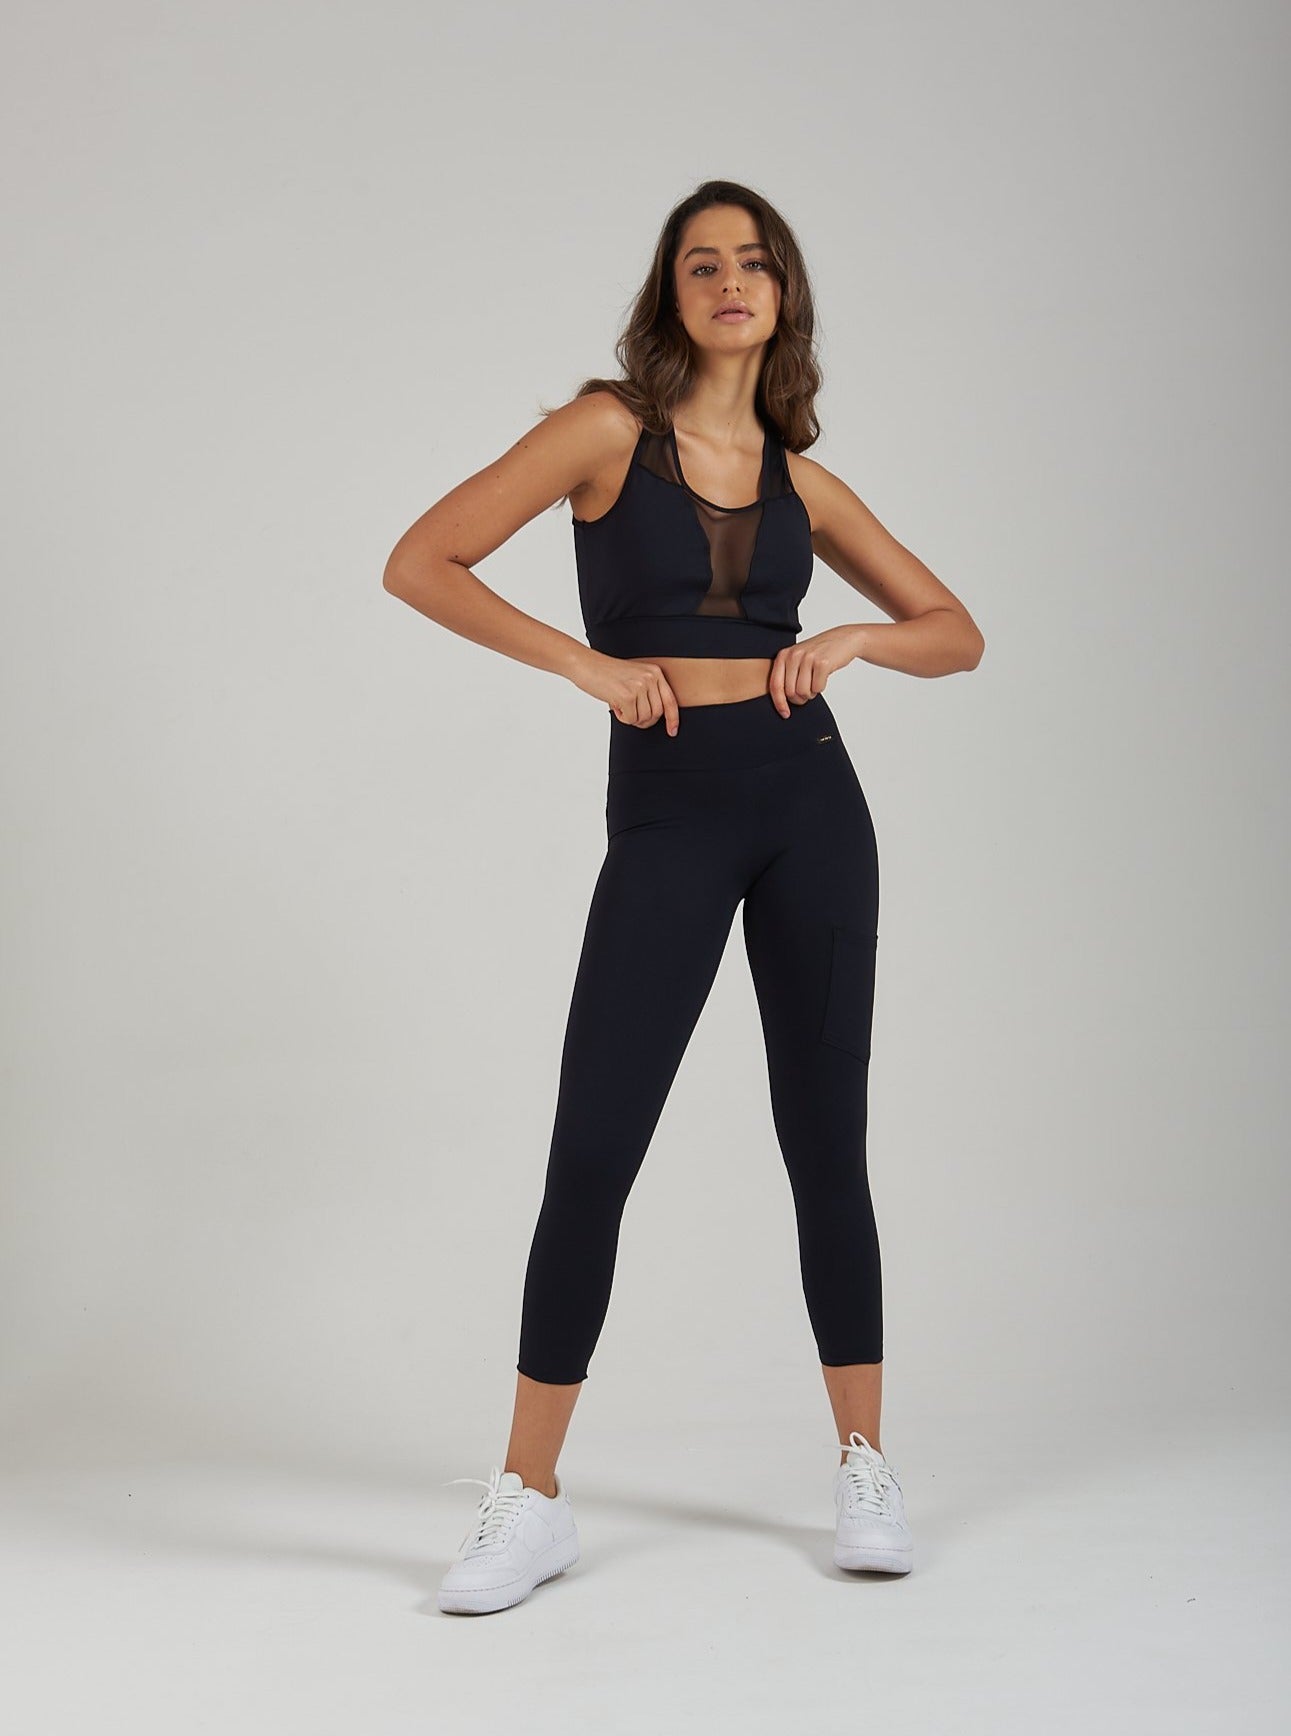 PRIME CLASSIC HIGH-WAIST 7/8 legging – COCOCH ACTIVEWEAR